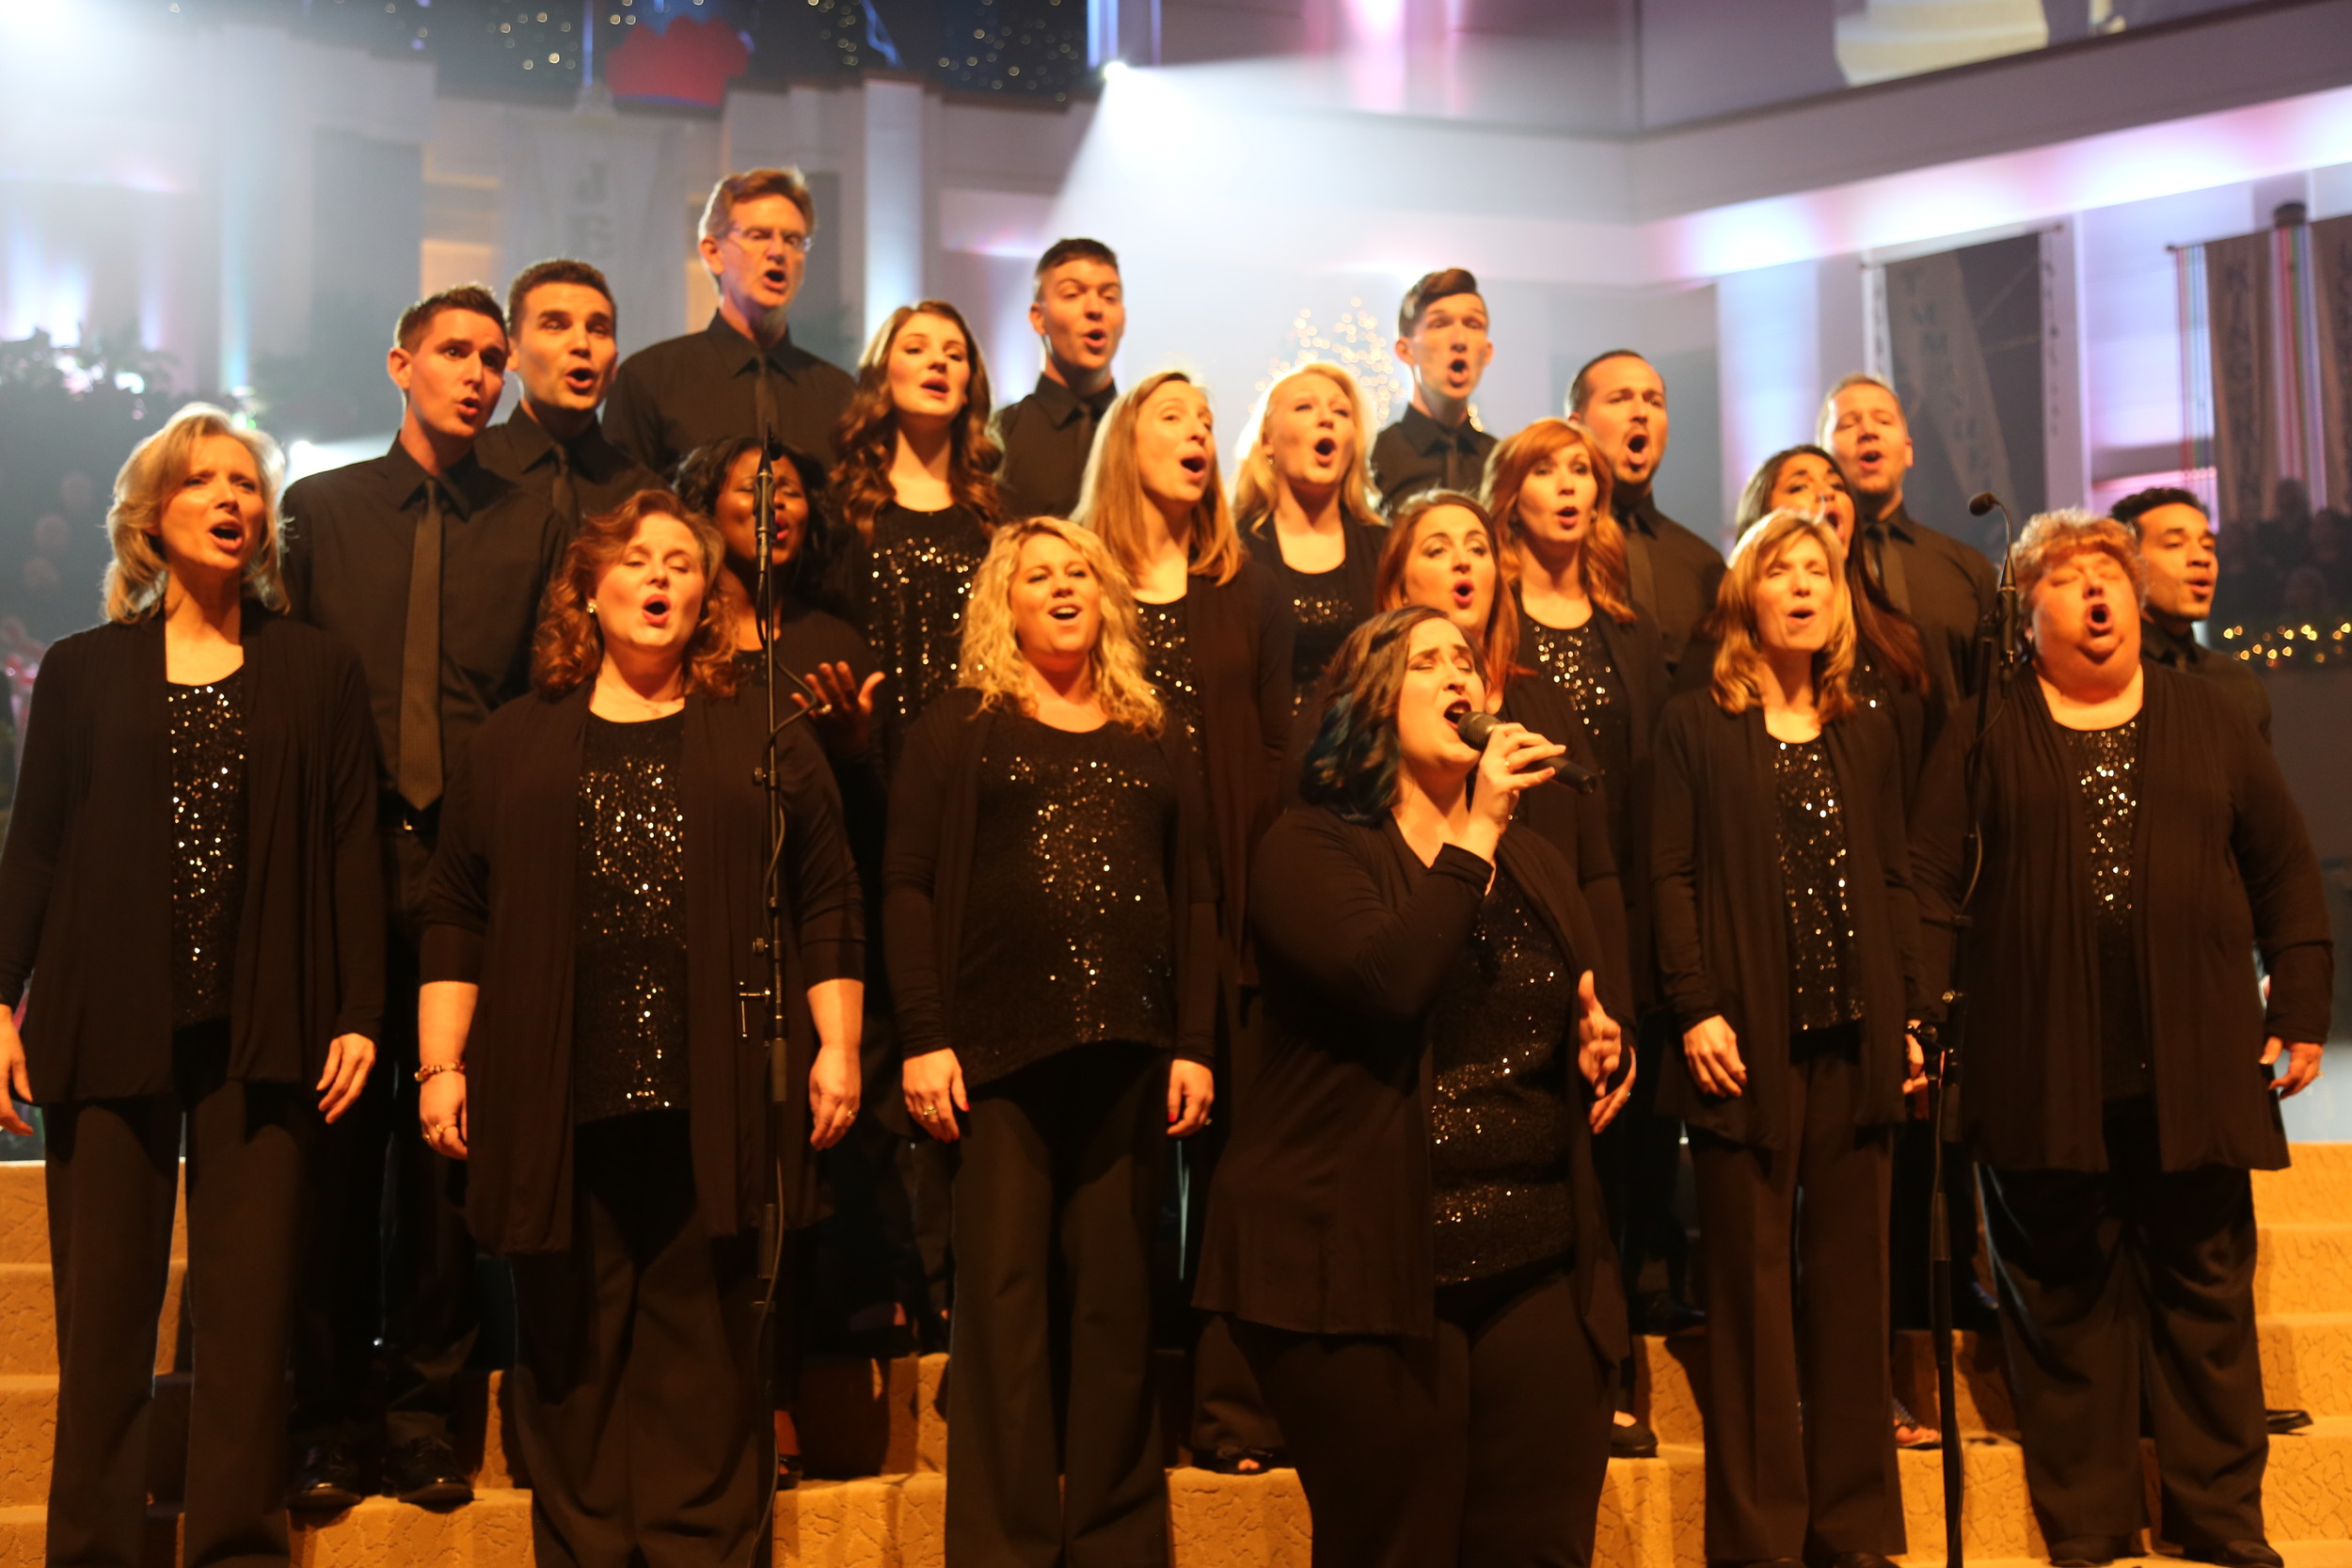 The Olive Vocal Ensemble will be just one of the many performances at the Marjorie Younce Snook Public Library’s 5th annual Christmas Concert, taking place on November 18.